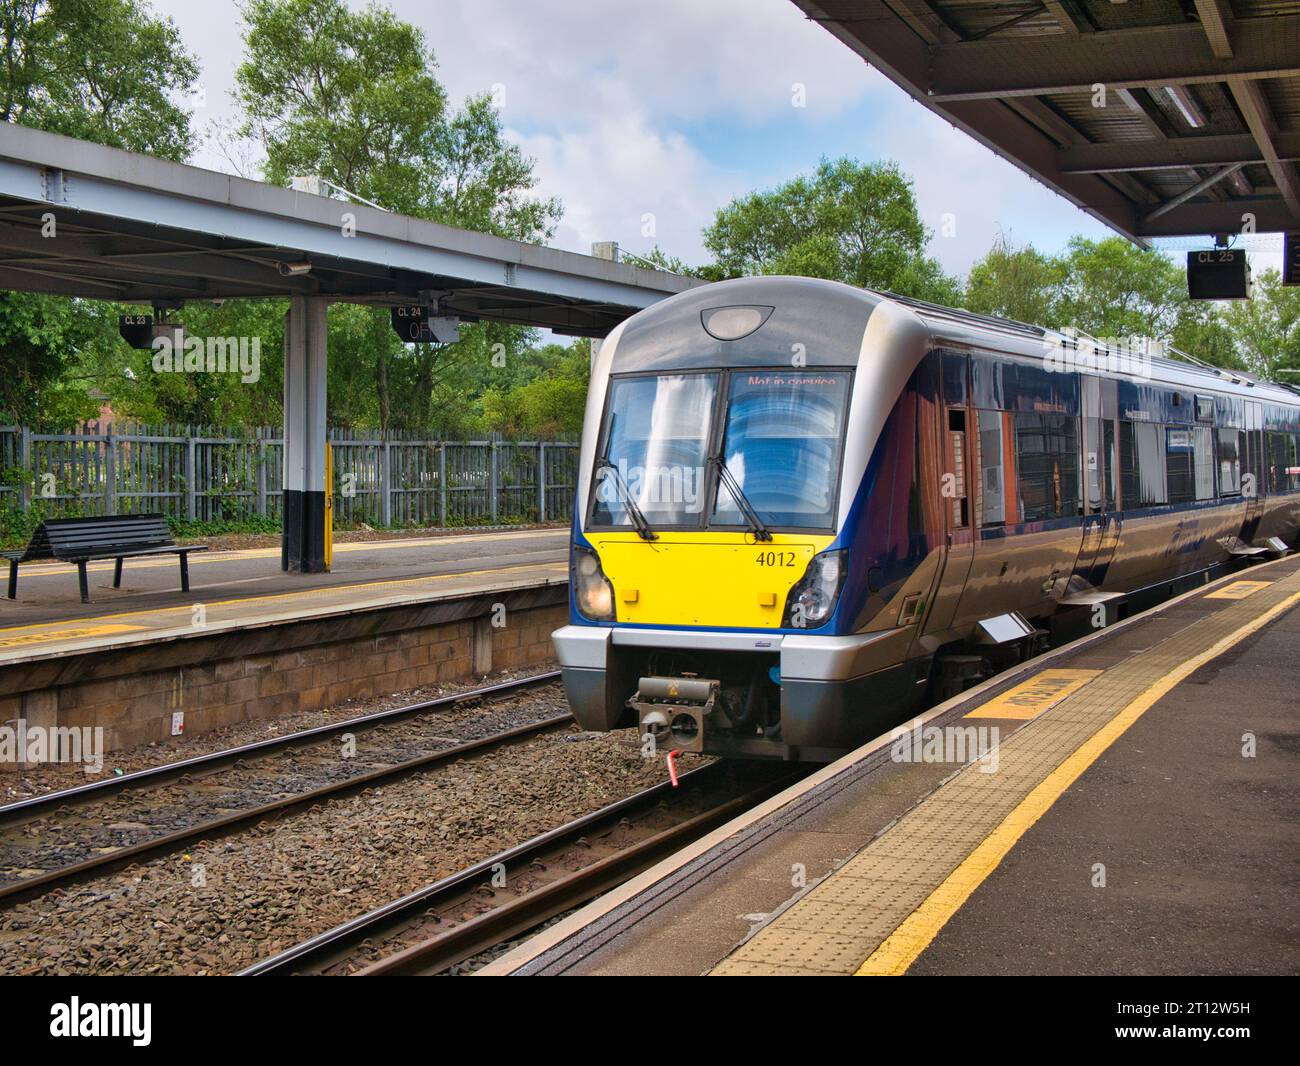 A local commuter train arrives at a deserted platform at Lanyon Place Station in Belfast, Northern Ireland, UK. Taken on a sunny day in summer. Stock Photo